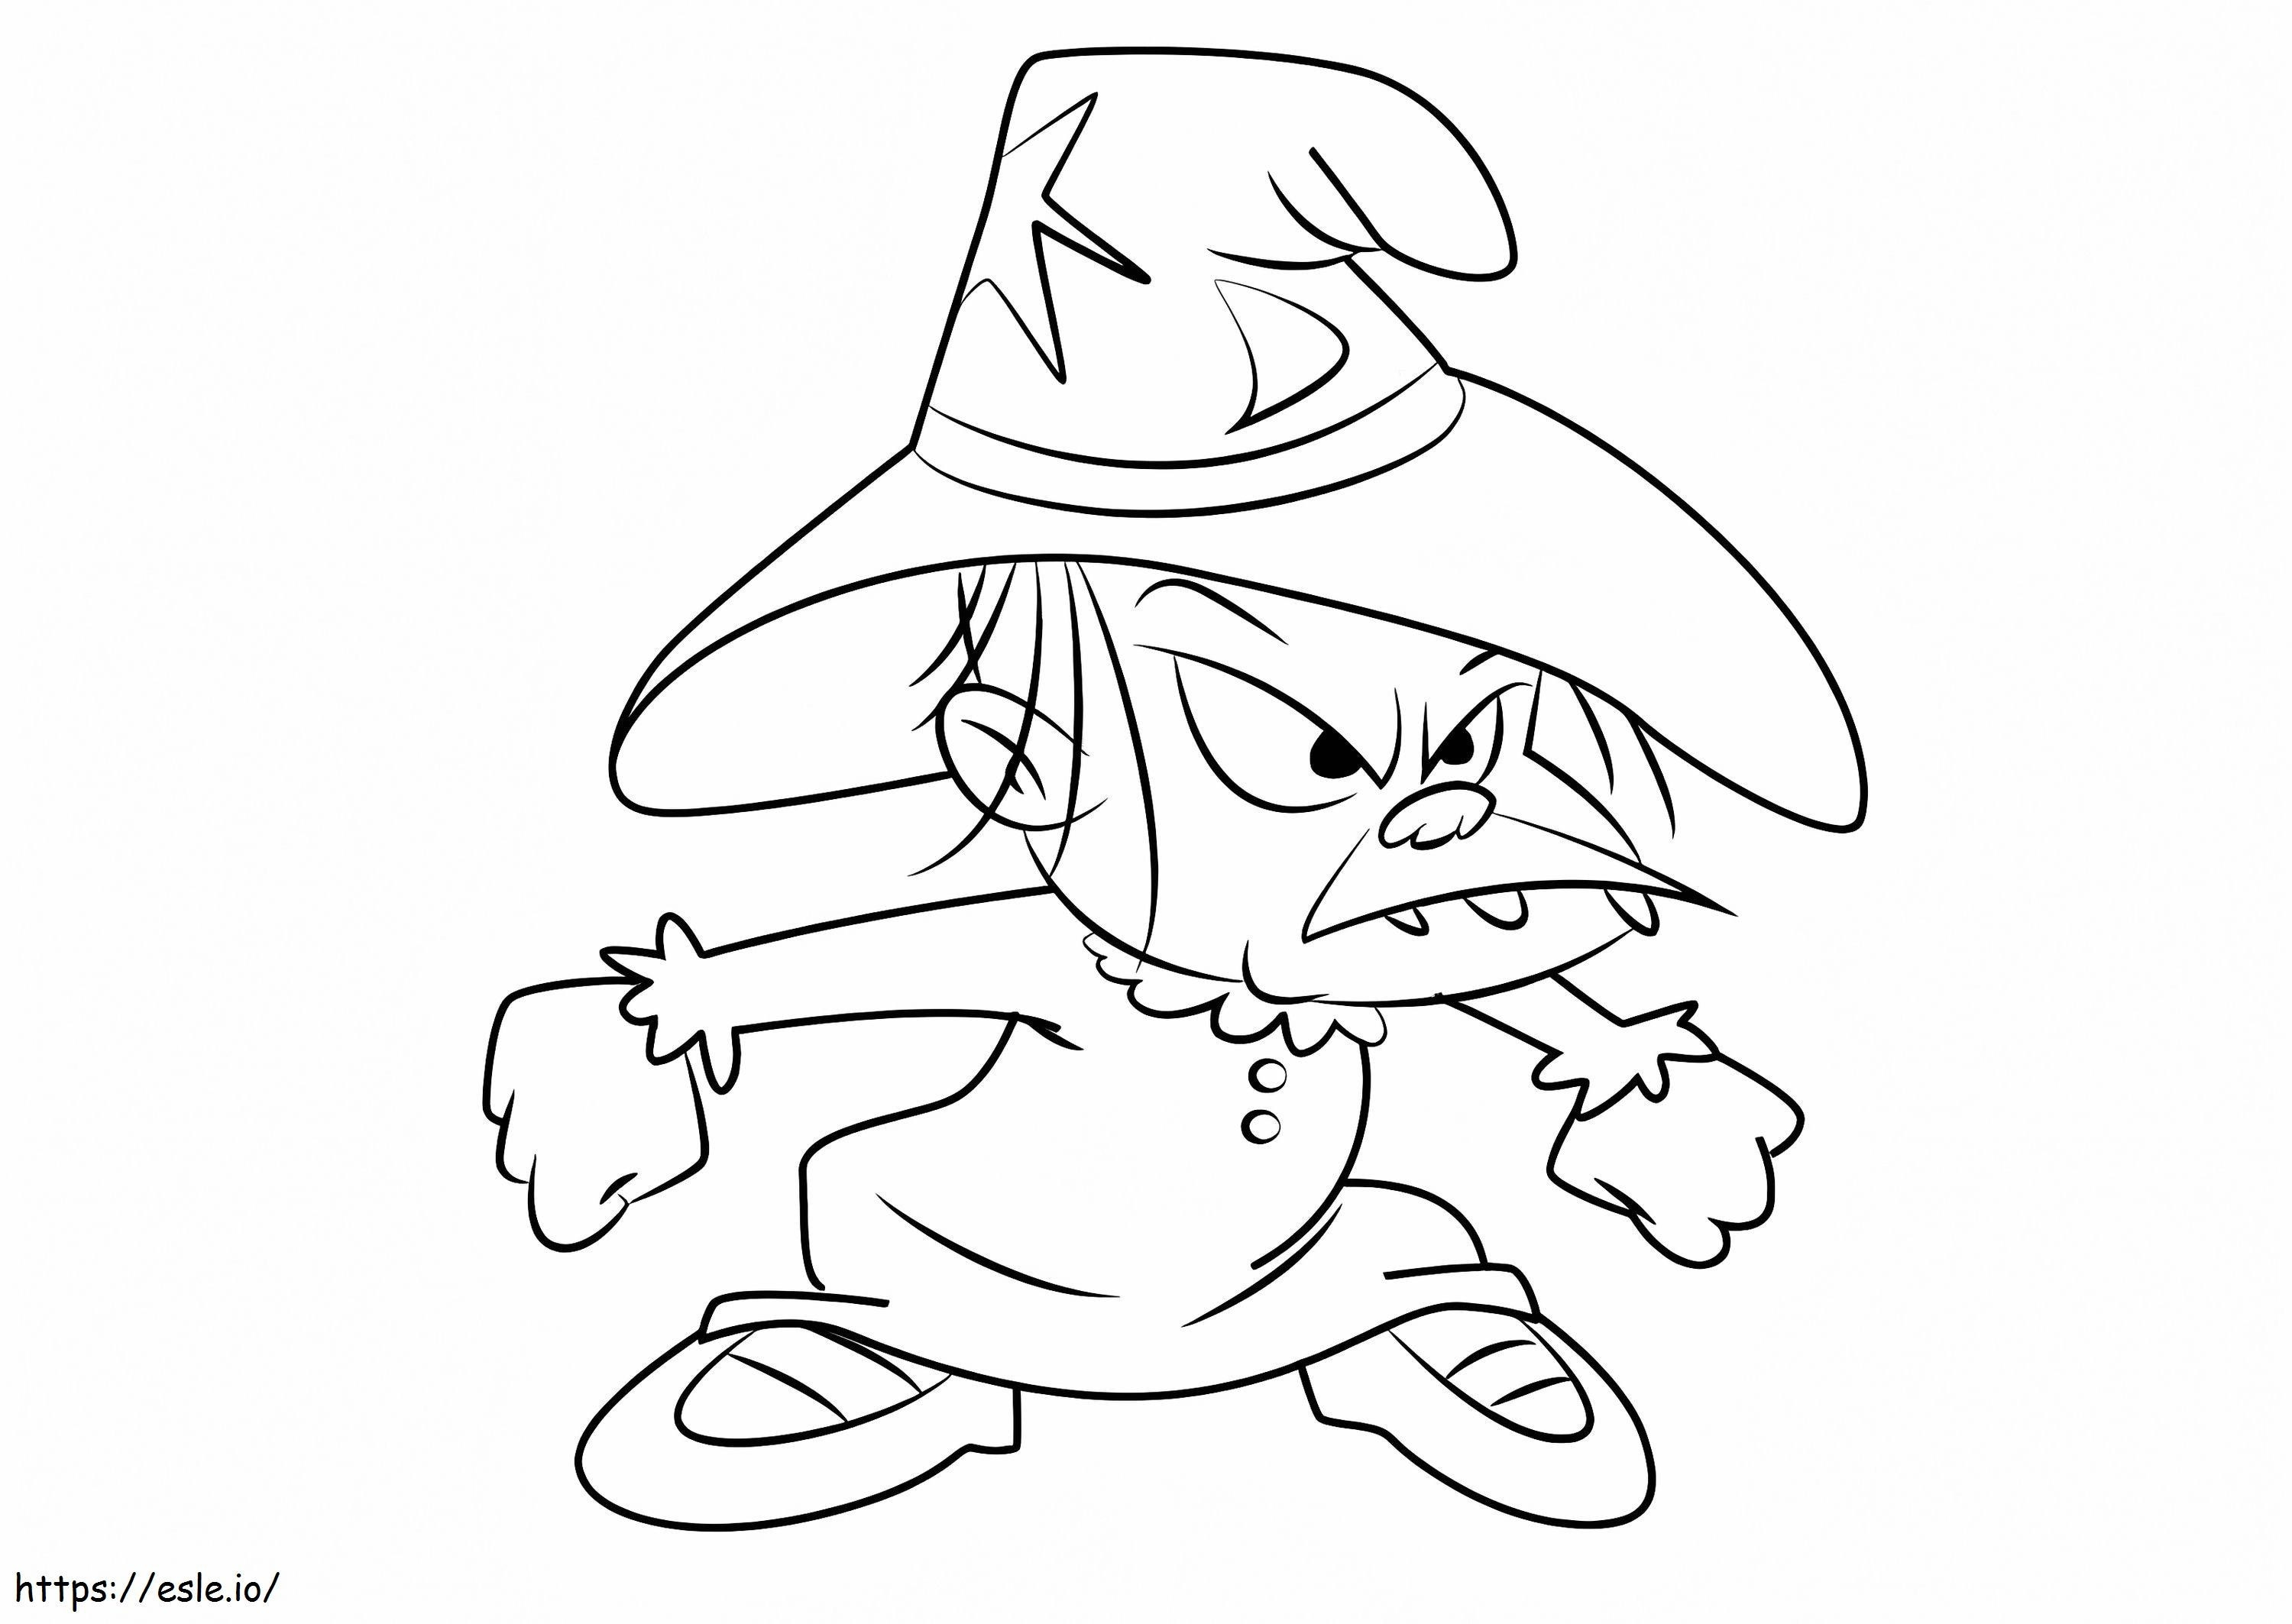 Witch Sandy From Tiny Toon Adventures coloring page